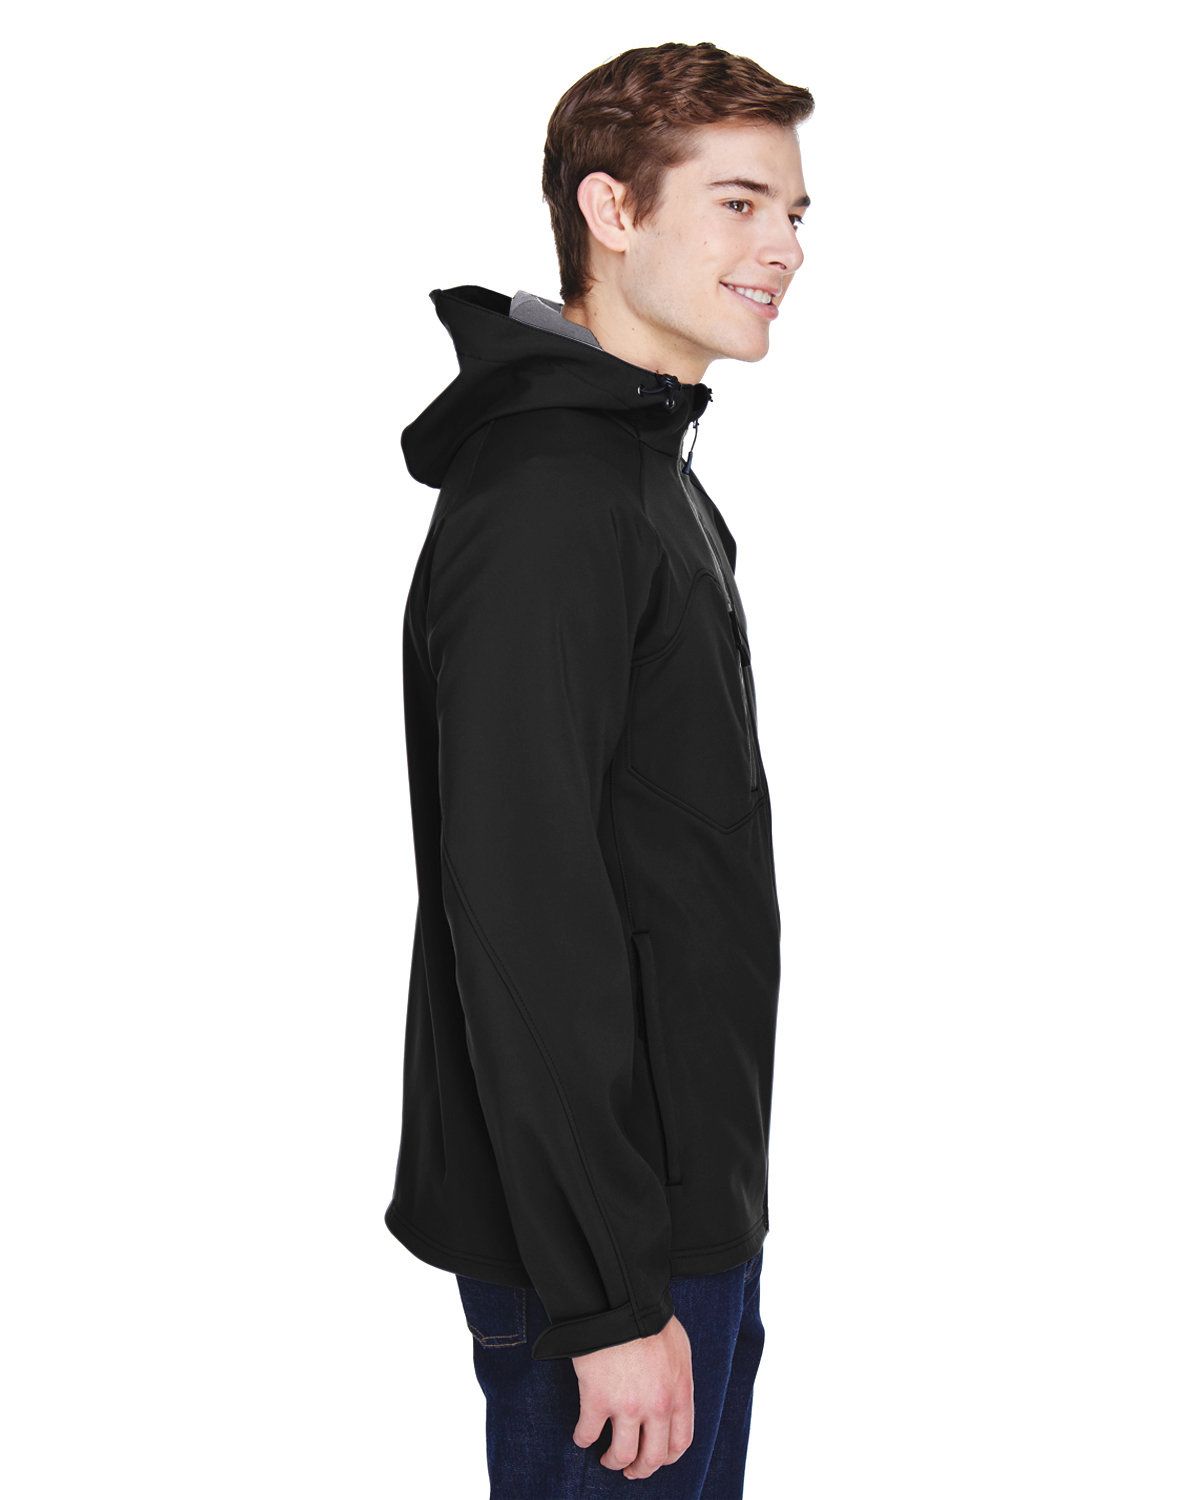 'Ash City - North End 88166 Men's Prospect Two-Layer Fleece Bonded Soft Shell Hooded Jacket'